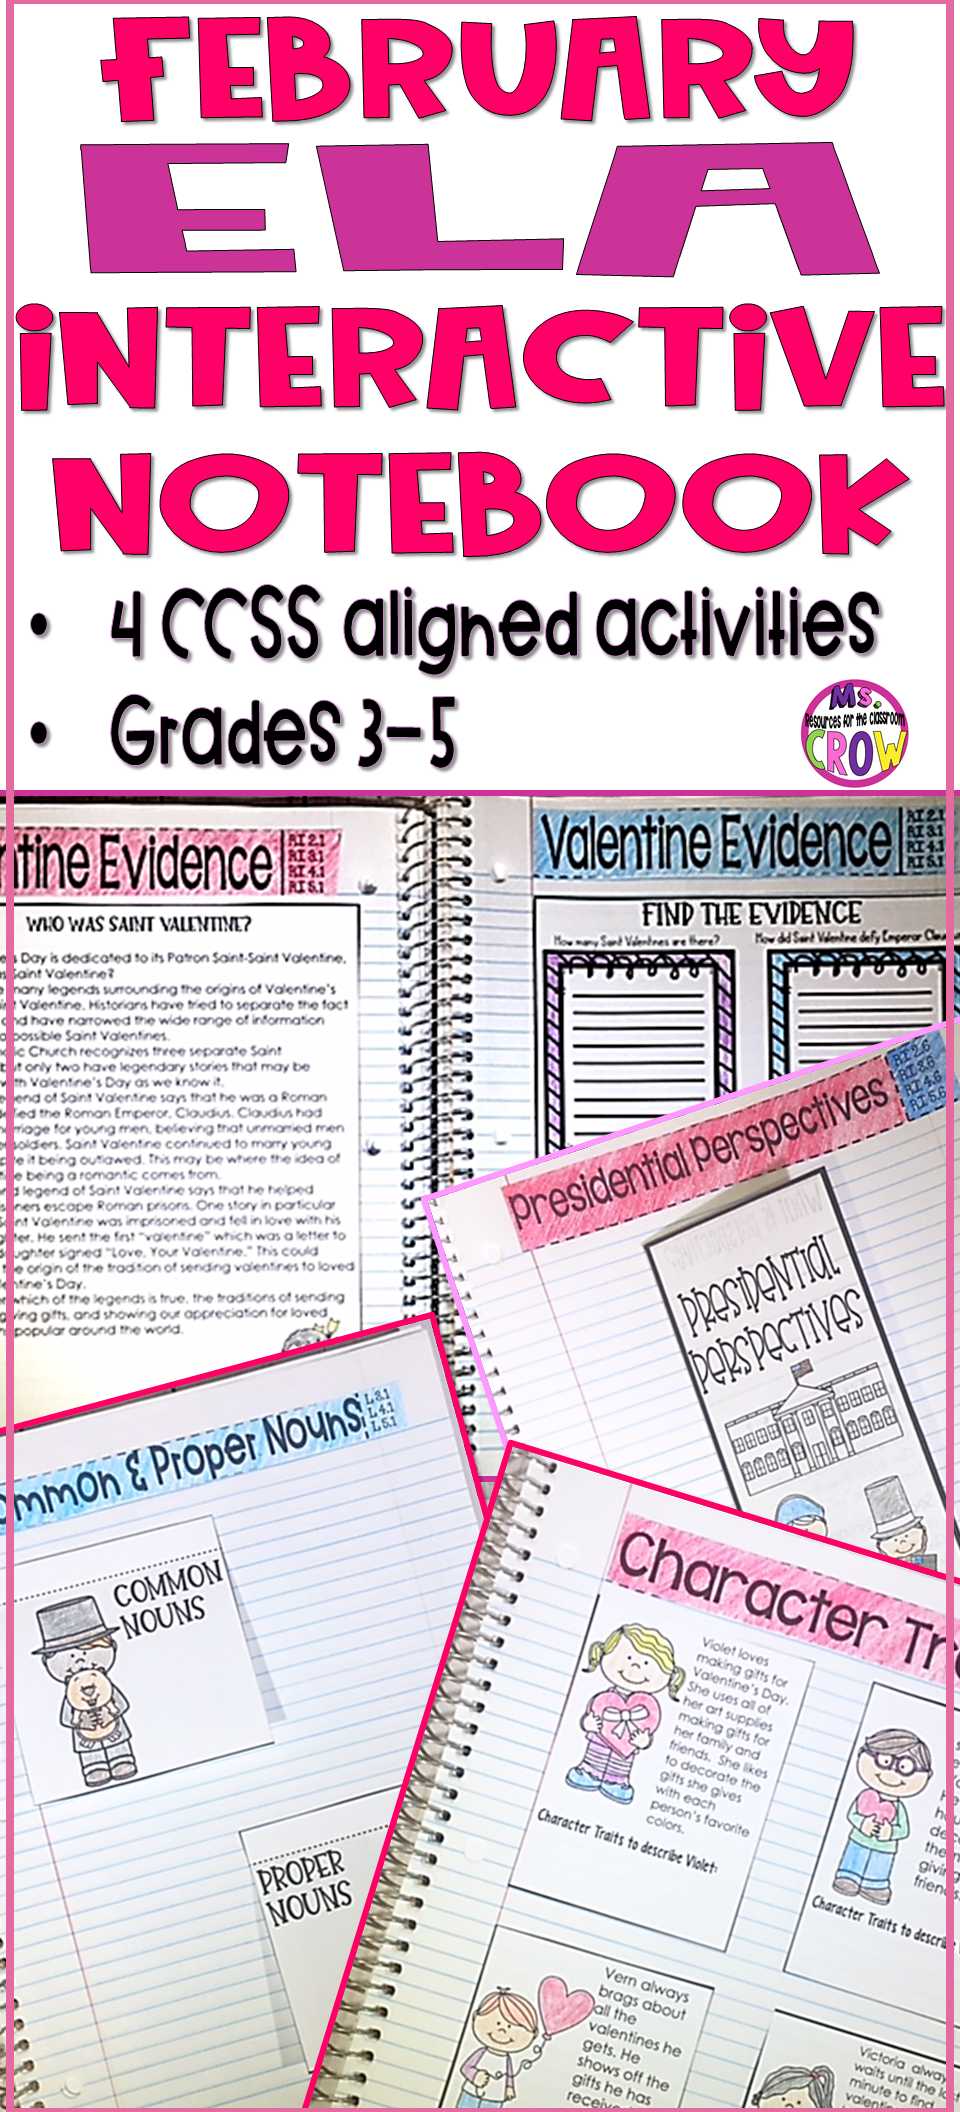 Character Traits Worksheet 3rd Grade with Ela Interactive Notebook February